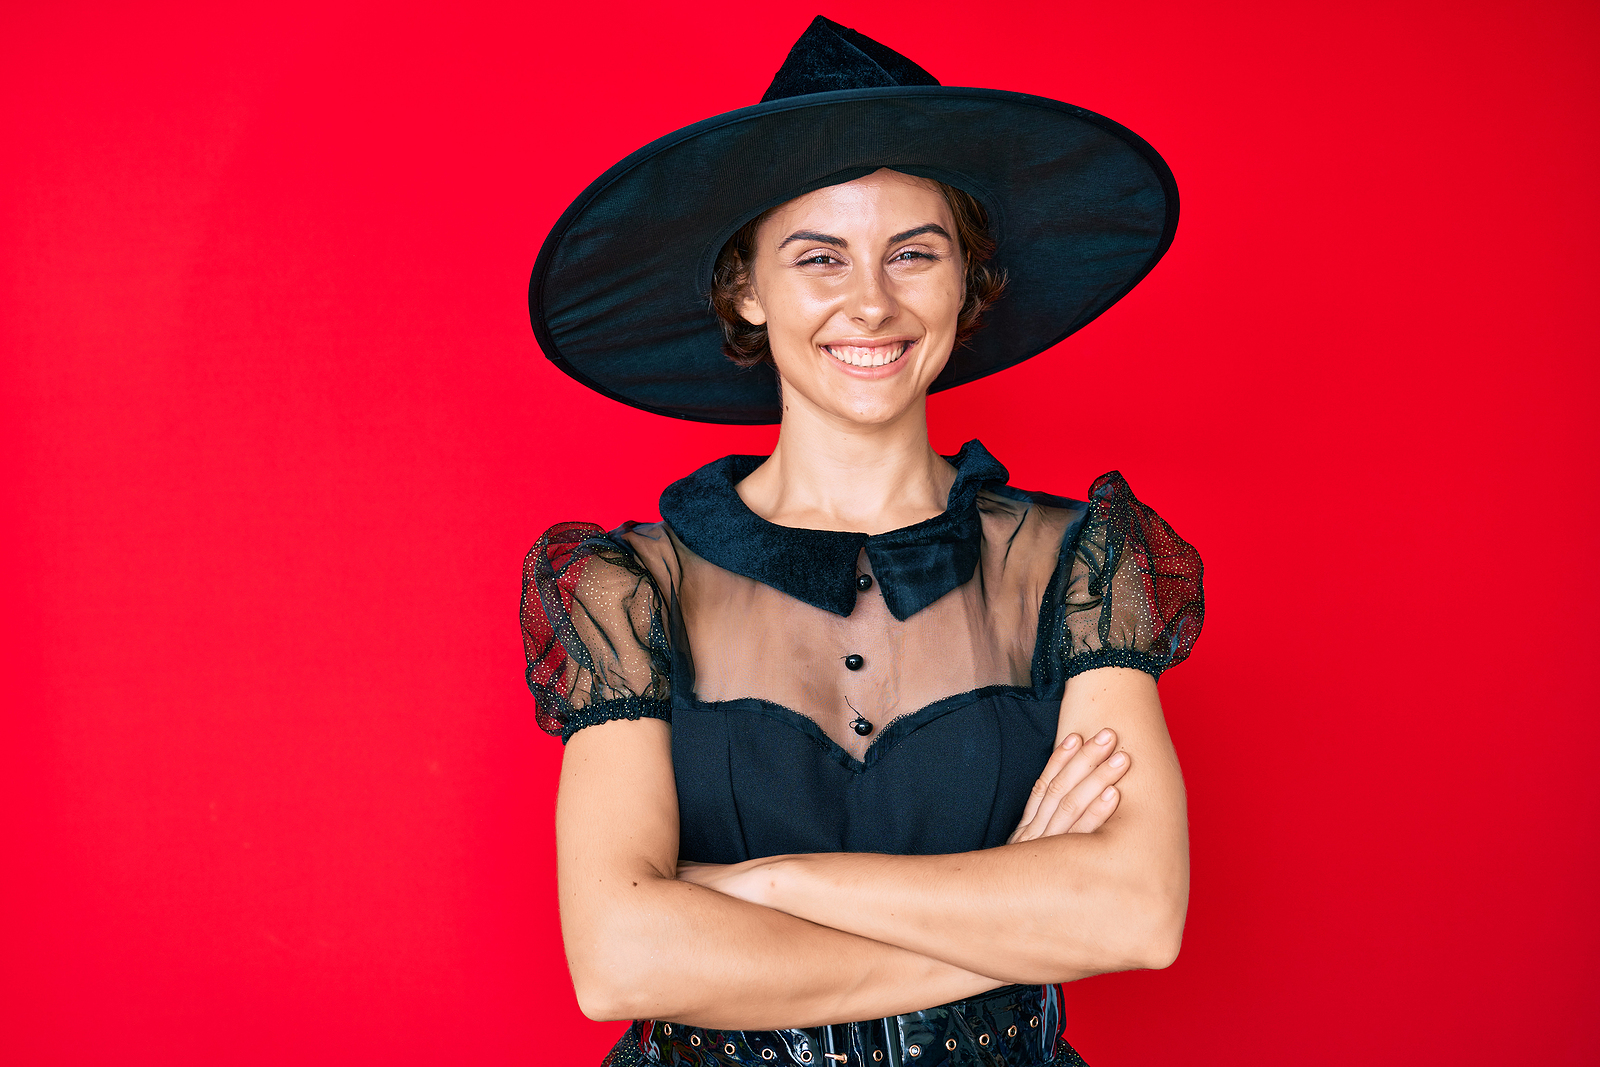 A confident woman with a witch outfit and hat crosses her arms and smiles.